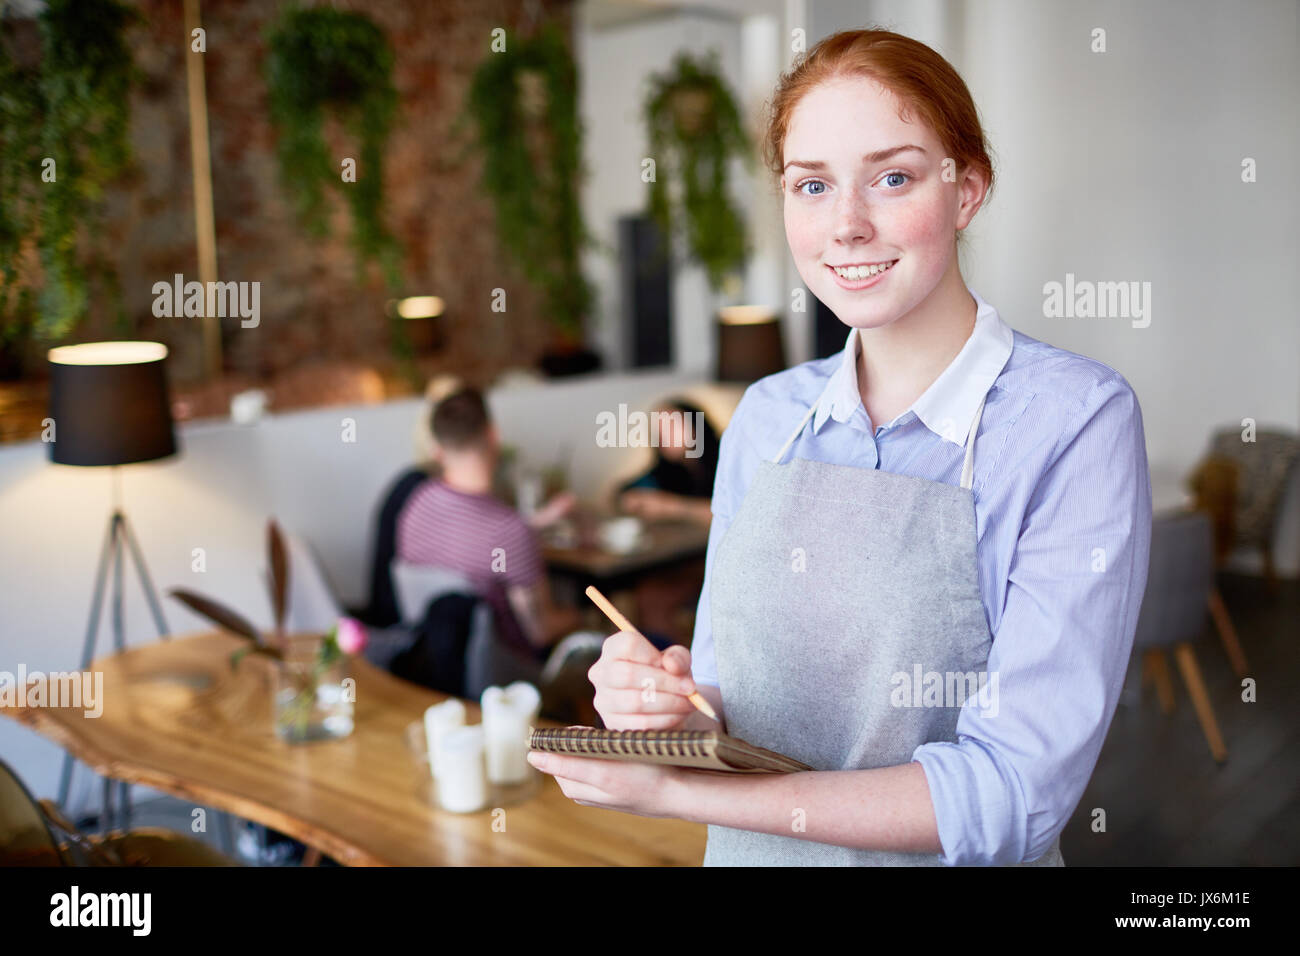 Portrait of Pretty Young Waitress Stock Photo